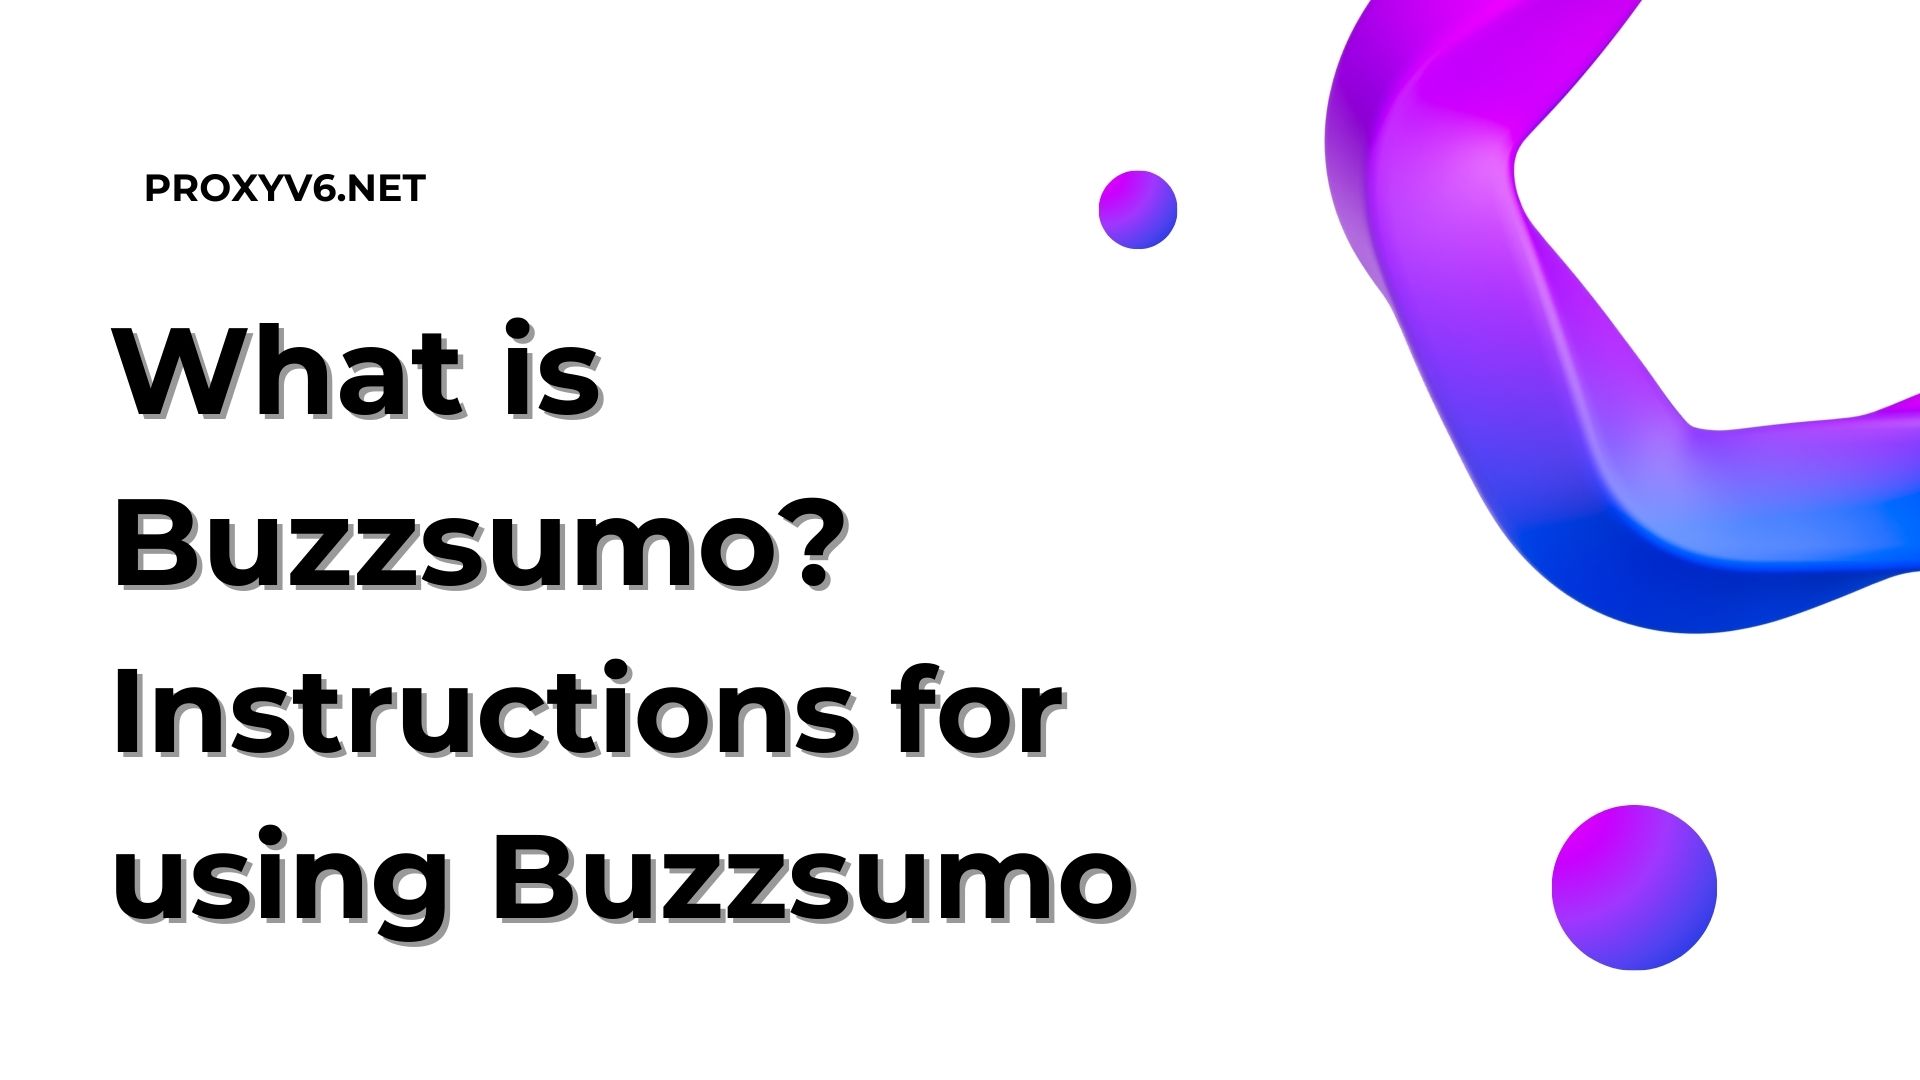 What is Buzzsumo? Instructions for using Buzzsumo